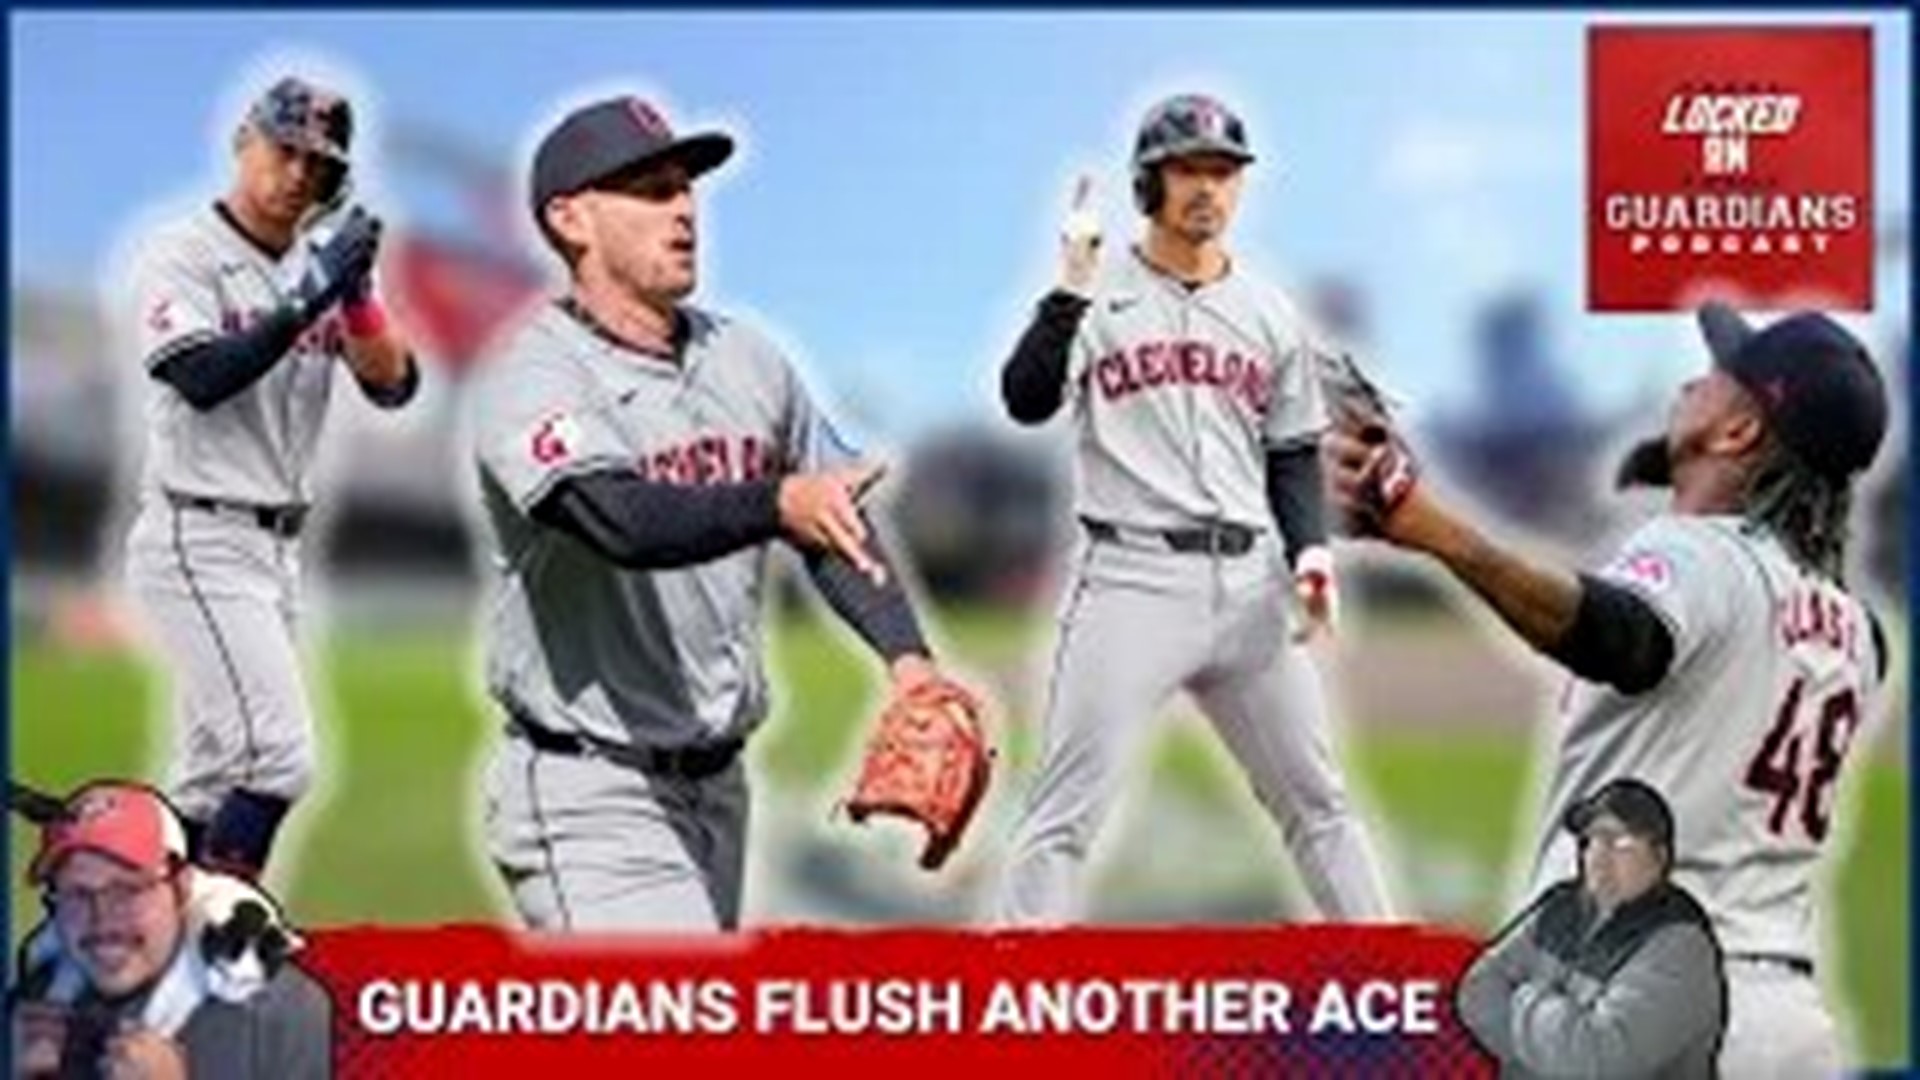 Another day, another ace defeated by the Cleveland Guardians. We look at the little things the Guardians did well offensively to beat Pablo Lopez and Minnesota.